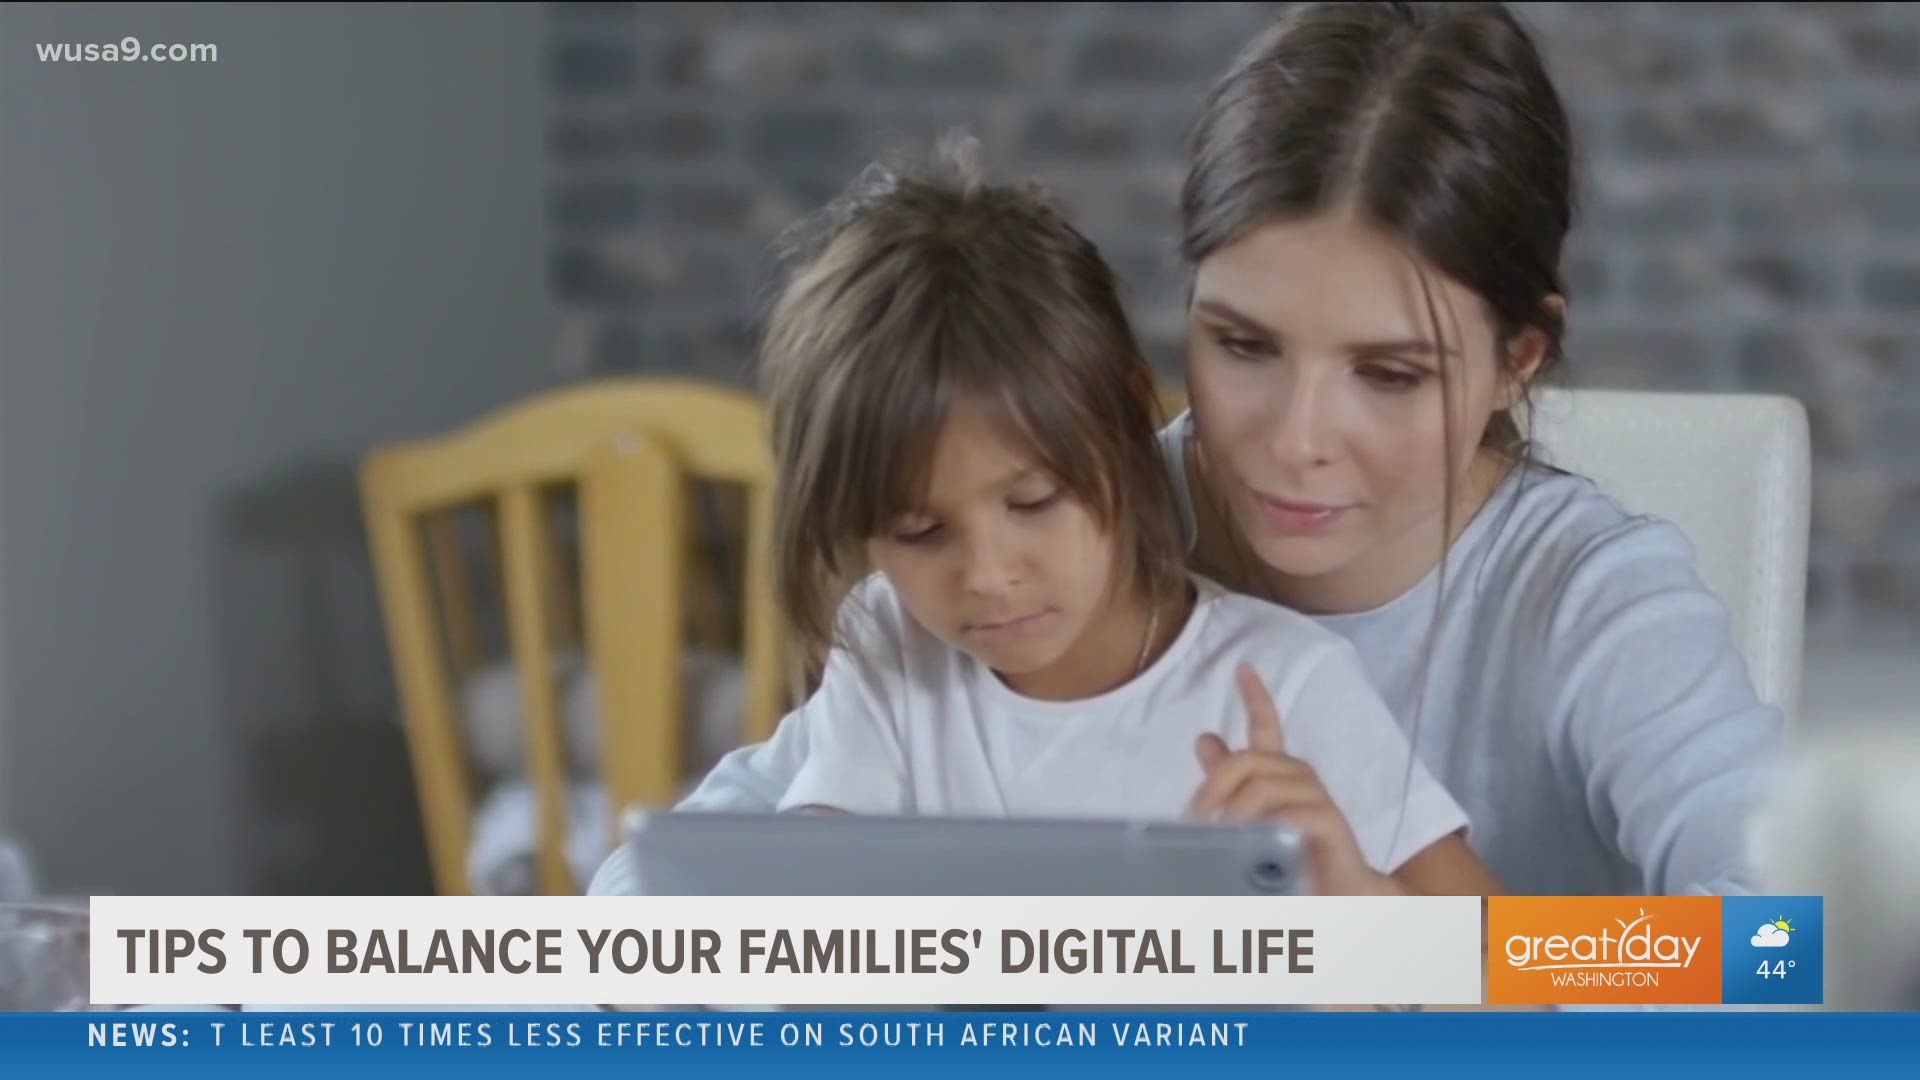 Denise Derosa, CEO of Cyber Sensible shares tips on how to manage your family's digital life.